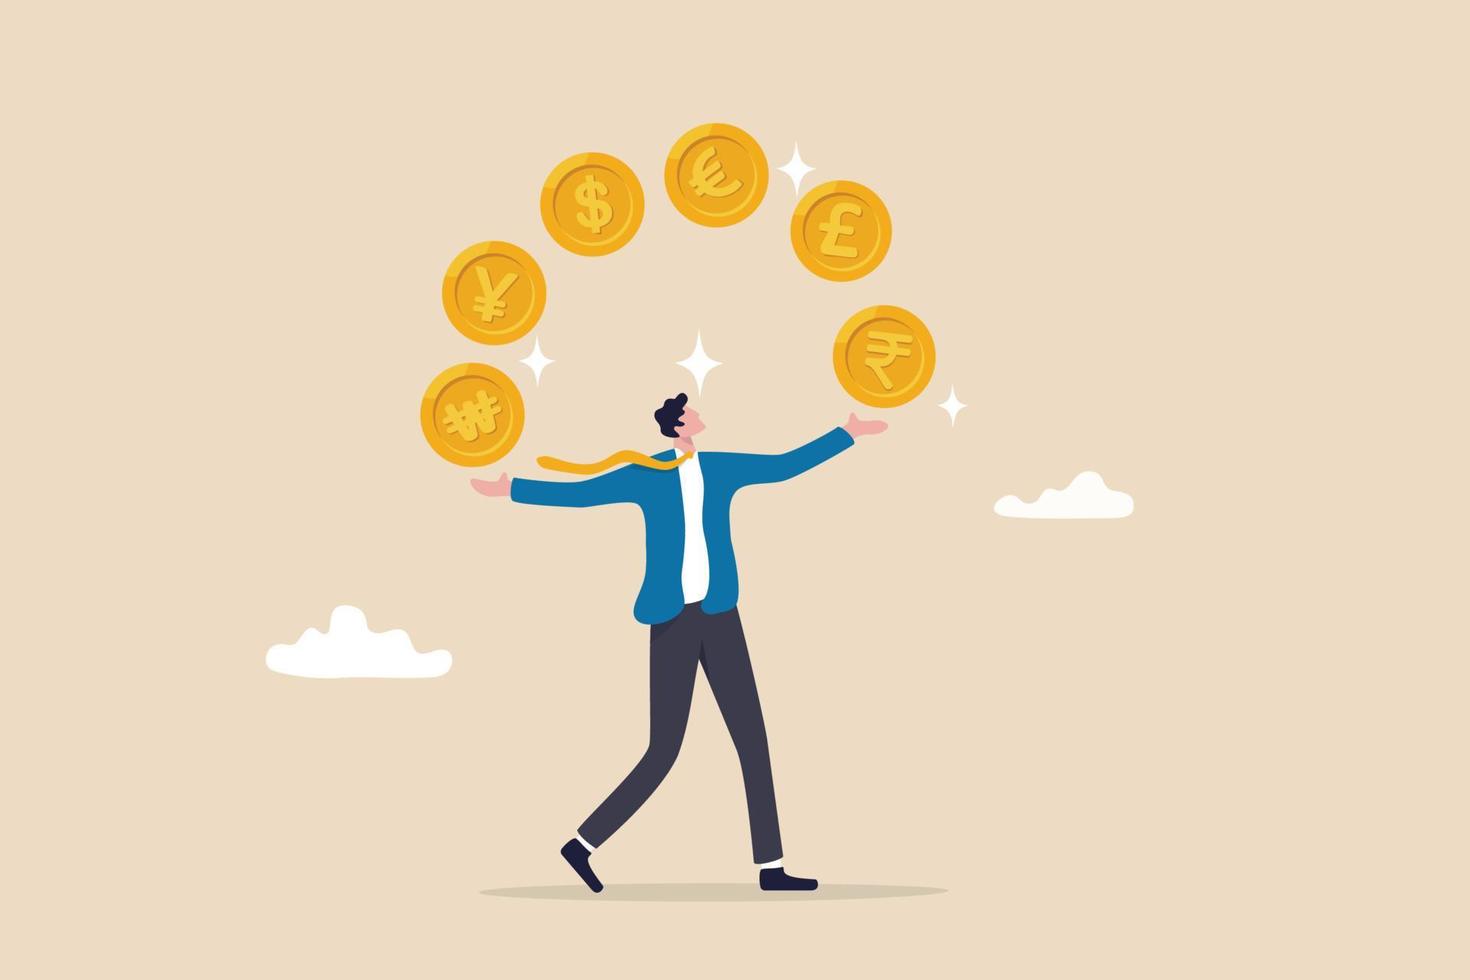 Currency exchange, international money transfer or foreign exchange, forex trading, global financial economy or currency convert concept, rich businessman juggling various international money coins. vector